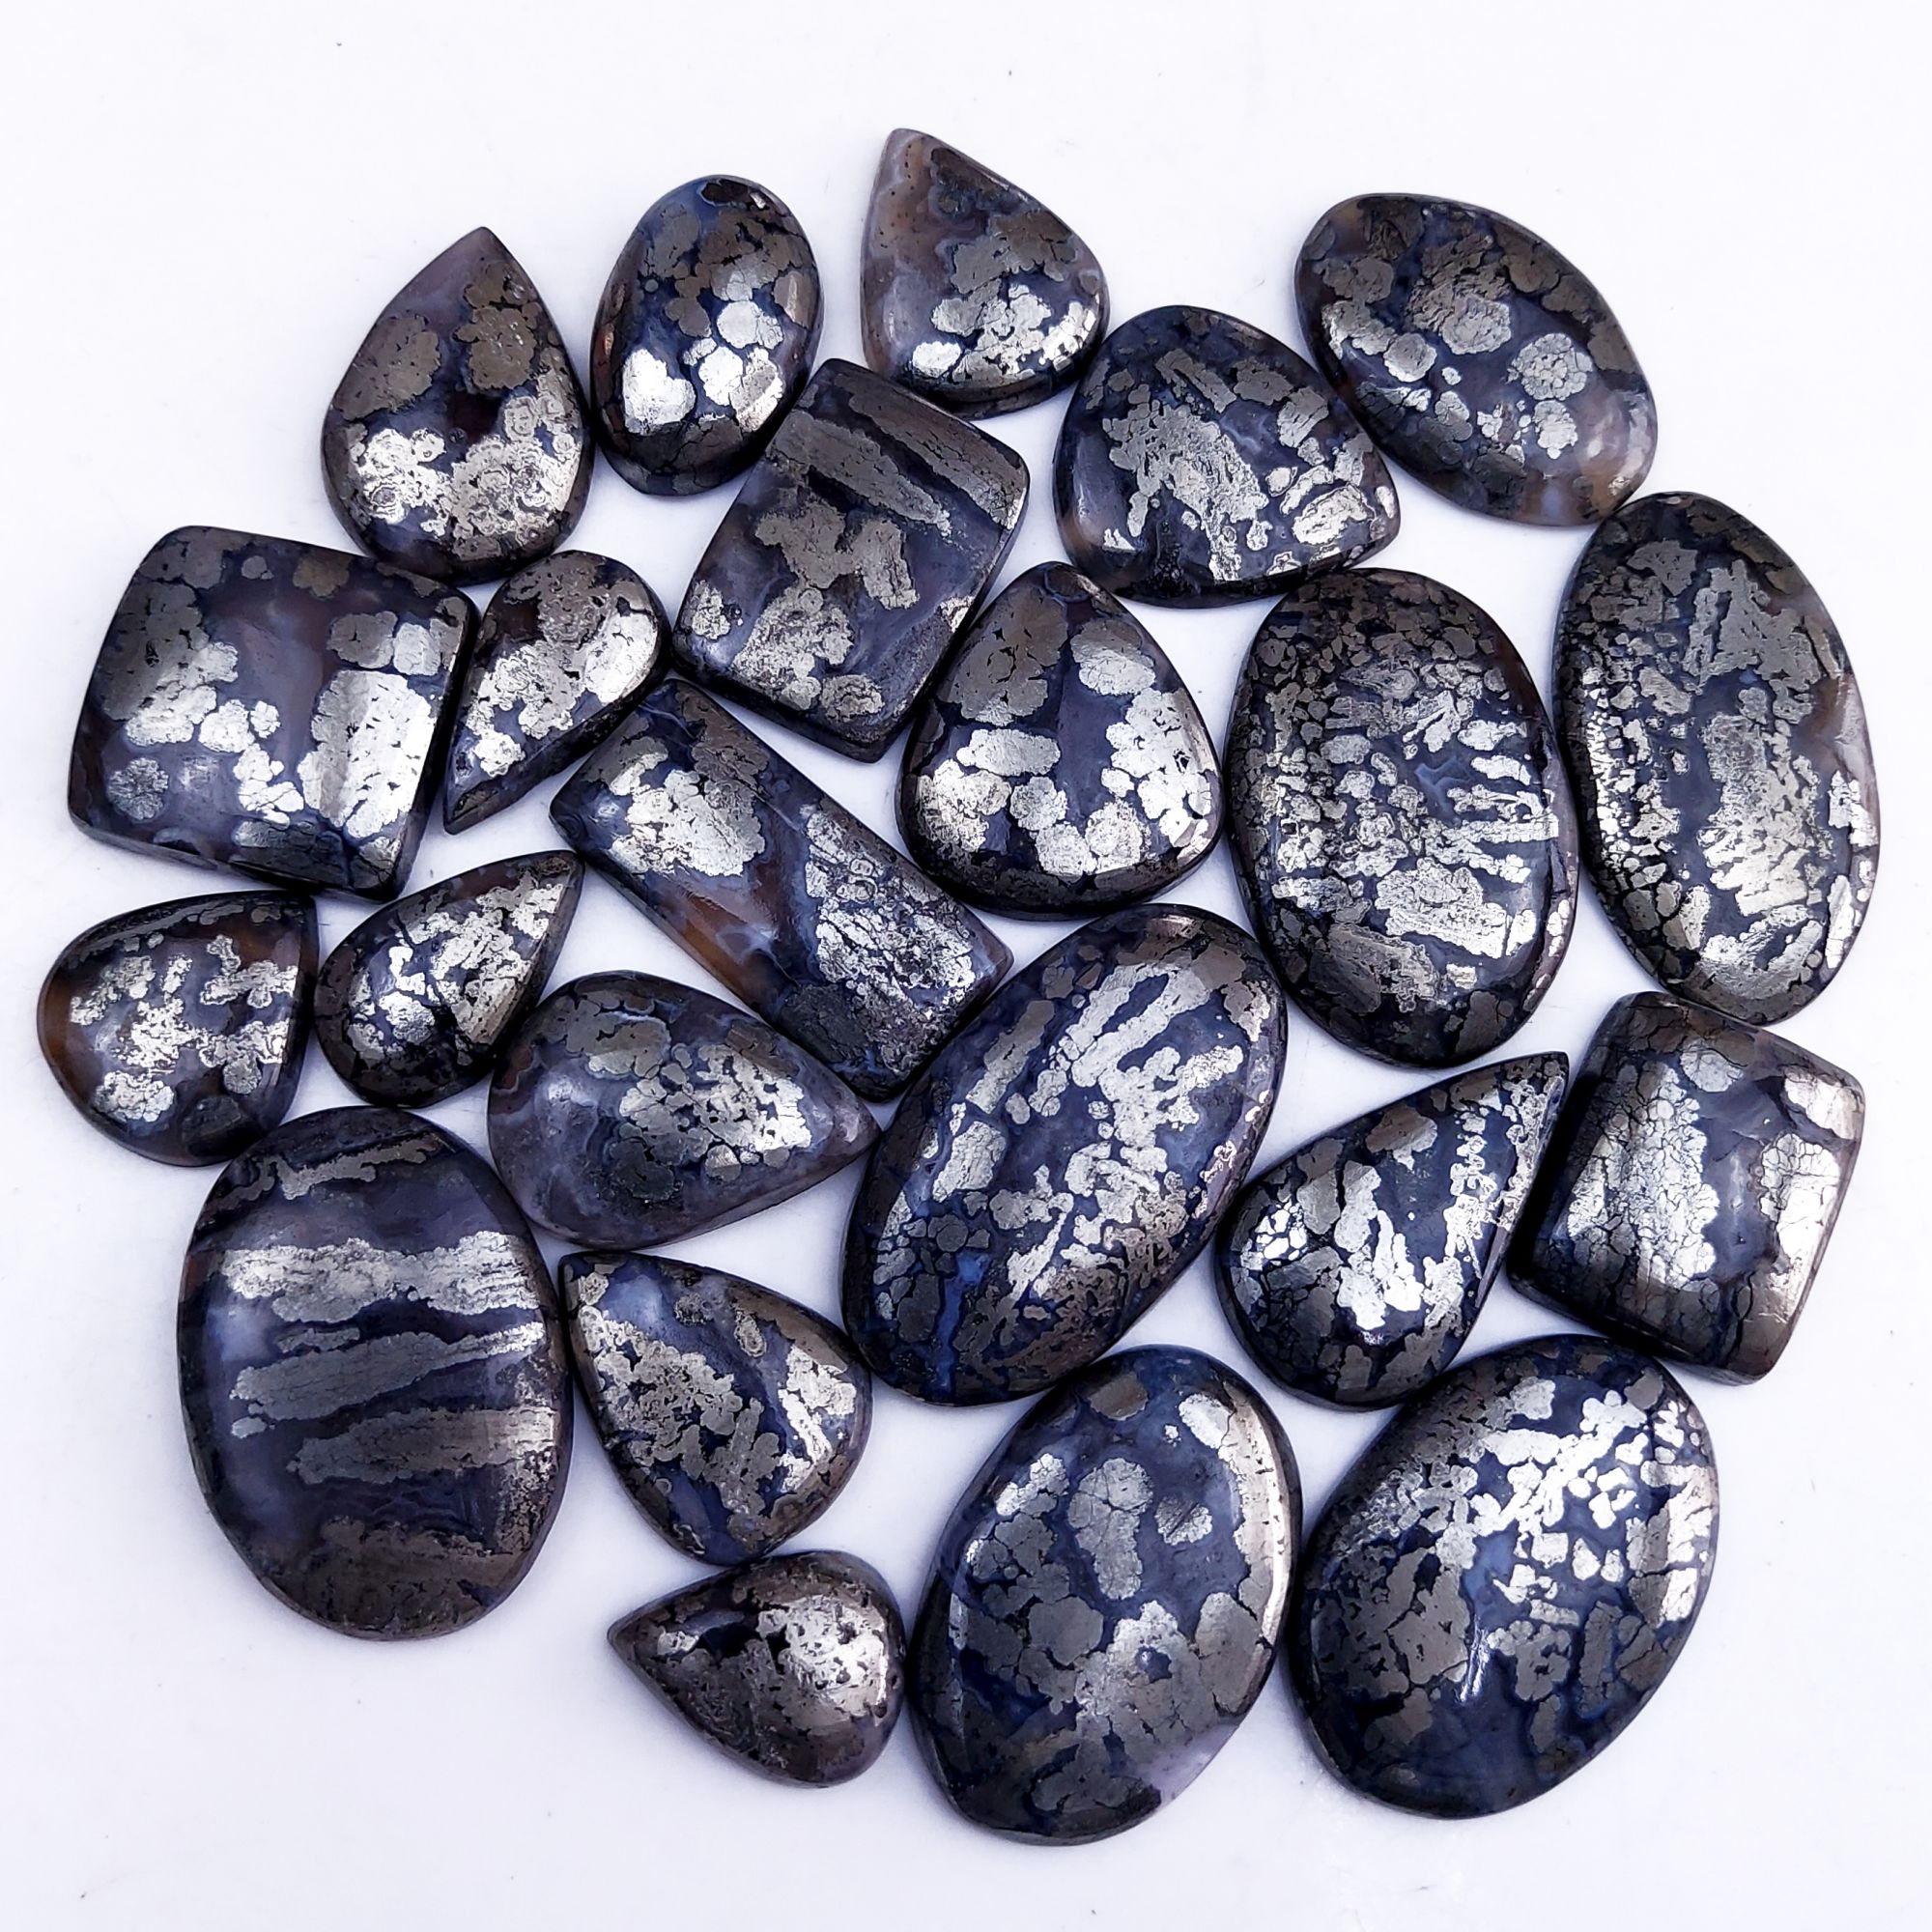 23Pcs 718Cts Natural Marcasite Grey Cabochon Back Side Unpolished Gemstone Semi-Precious Gemstones For Jewelry Making 38x20 18x14mm #10038